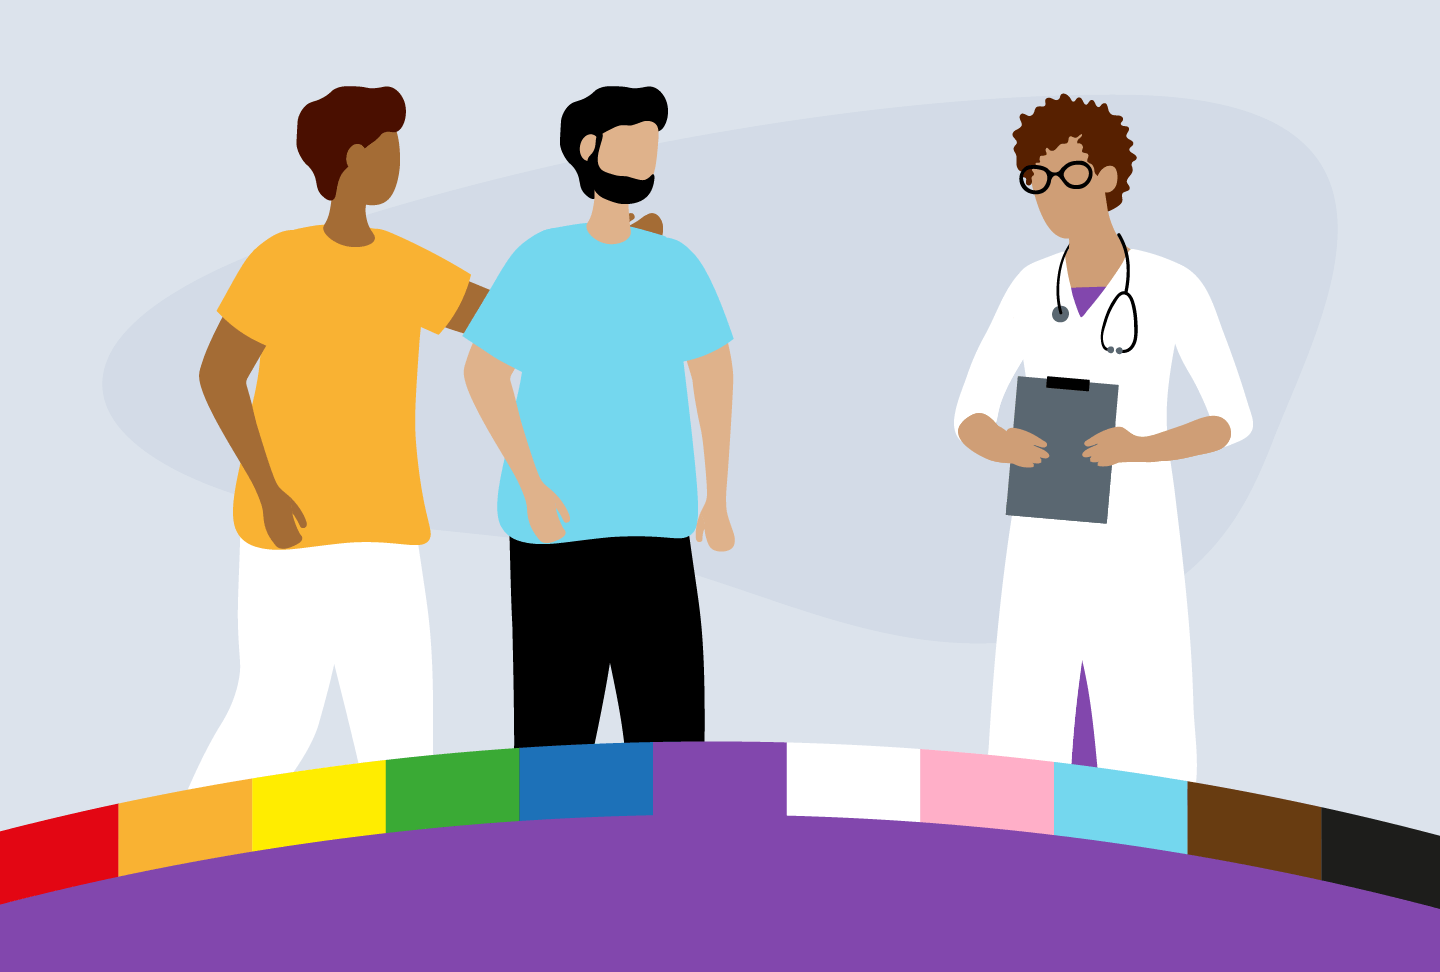 Two people who identify as LGBTQ+ speaking with doctor.